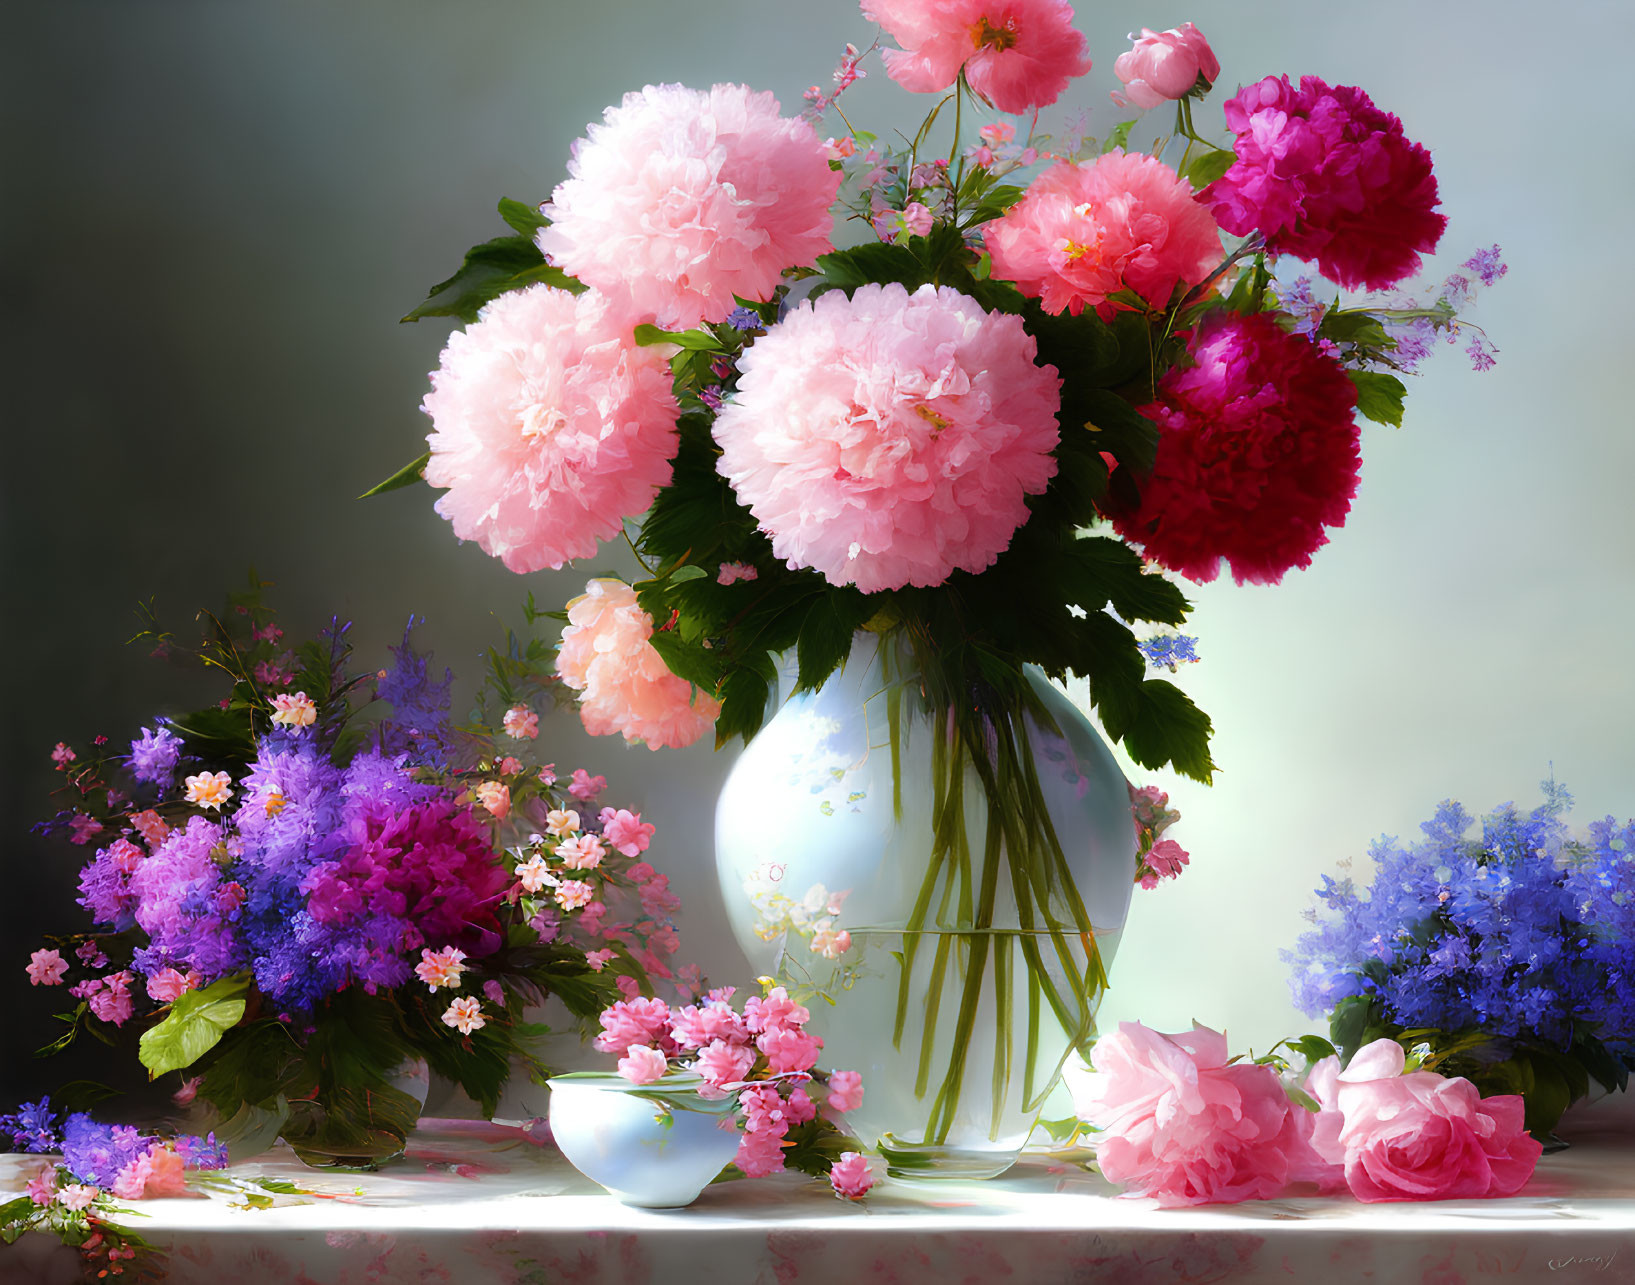 Colorful Still-Life Painting of Pink Peonies and Flowers on Table